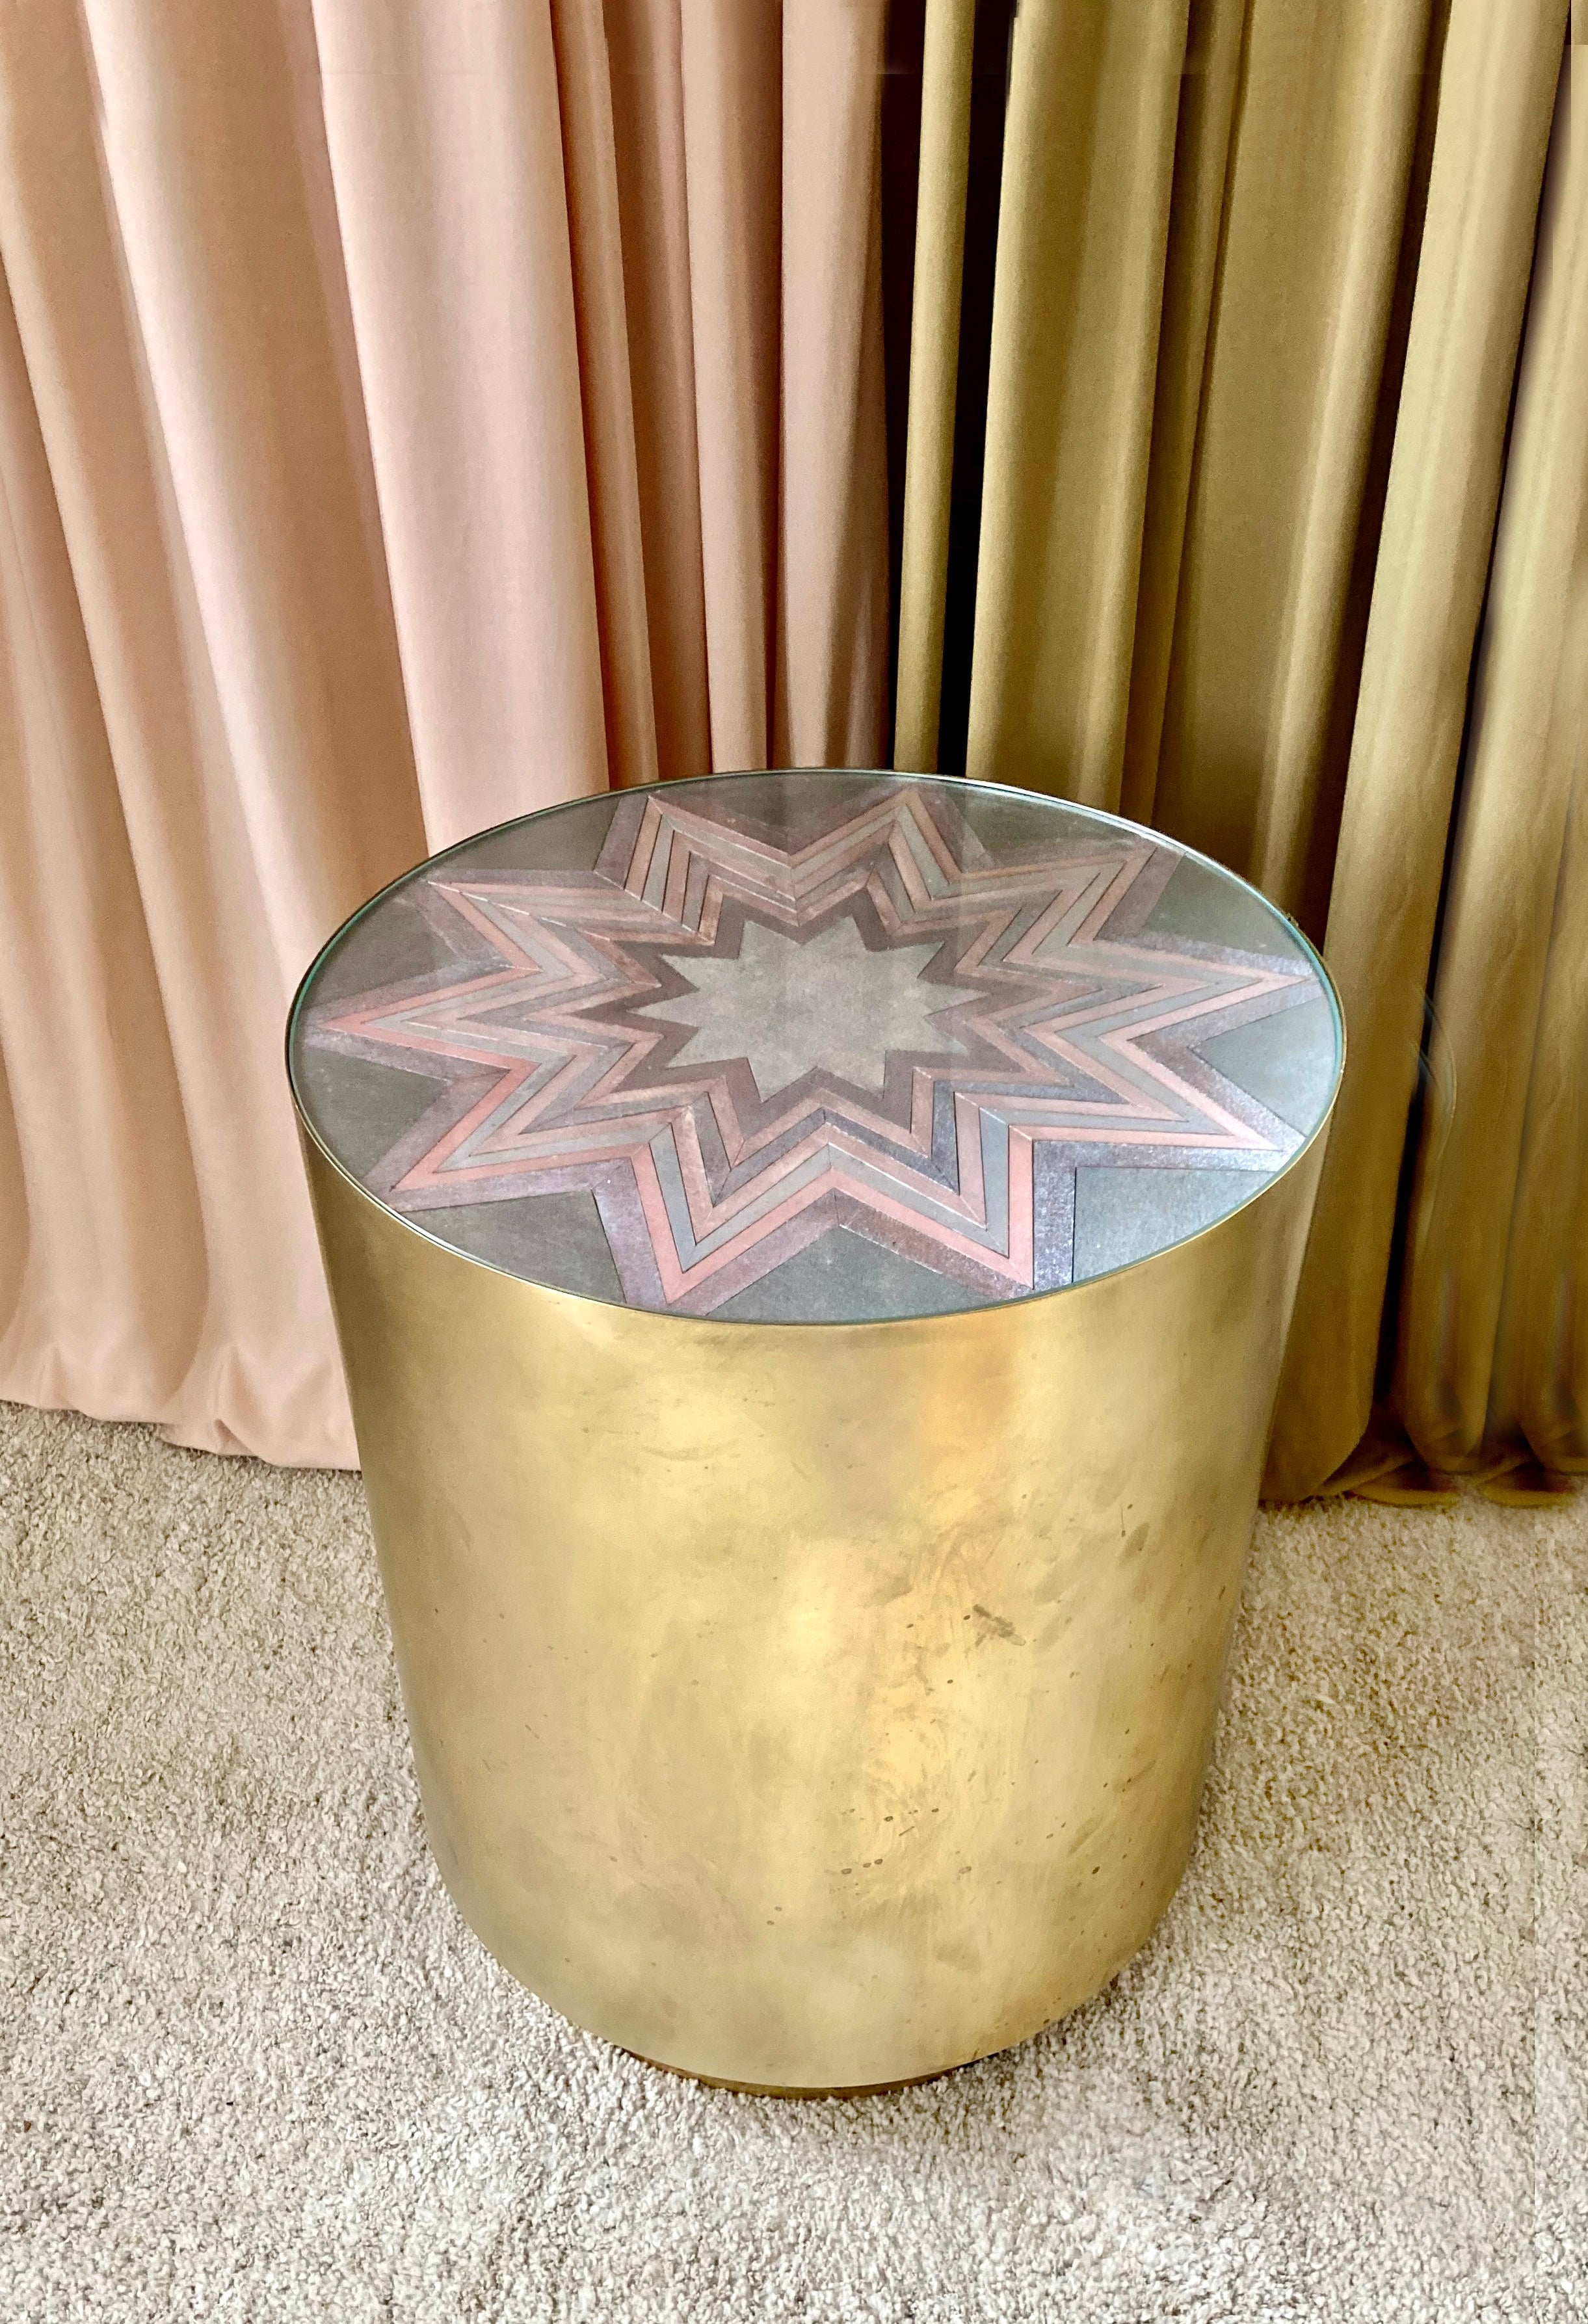 Star Side table